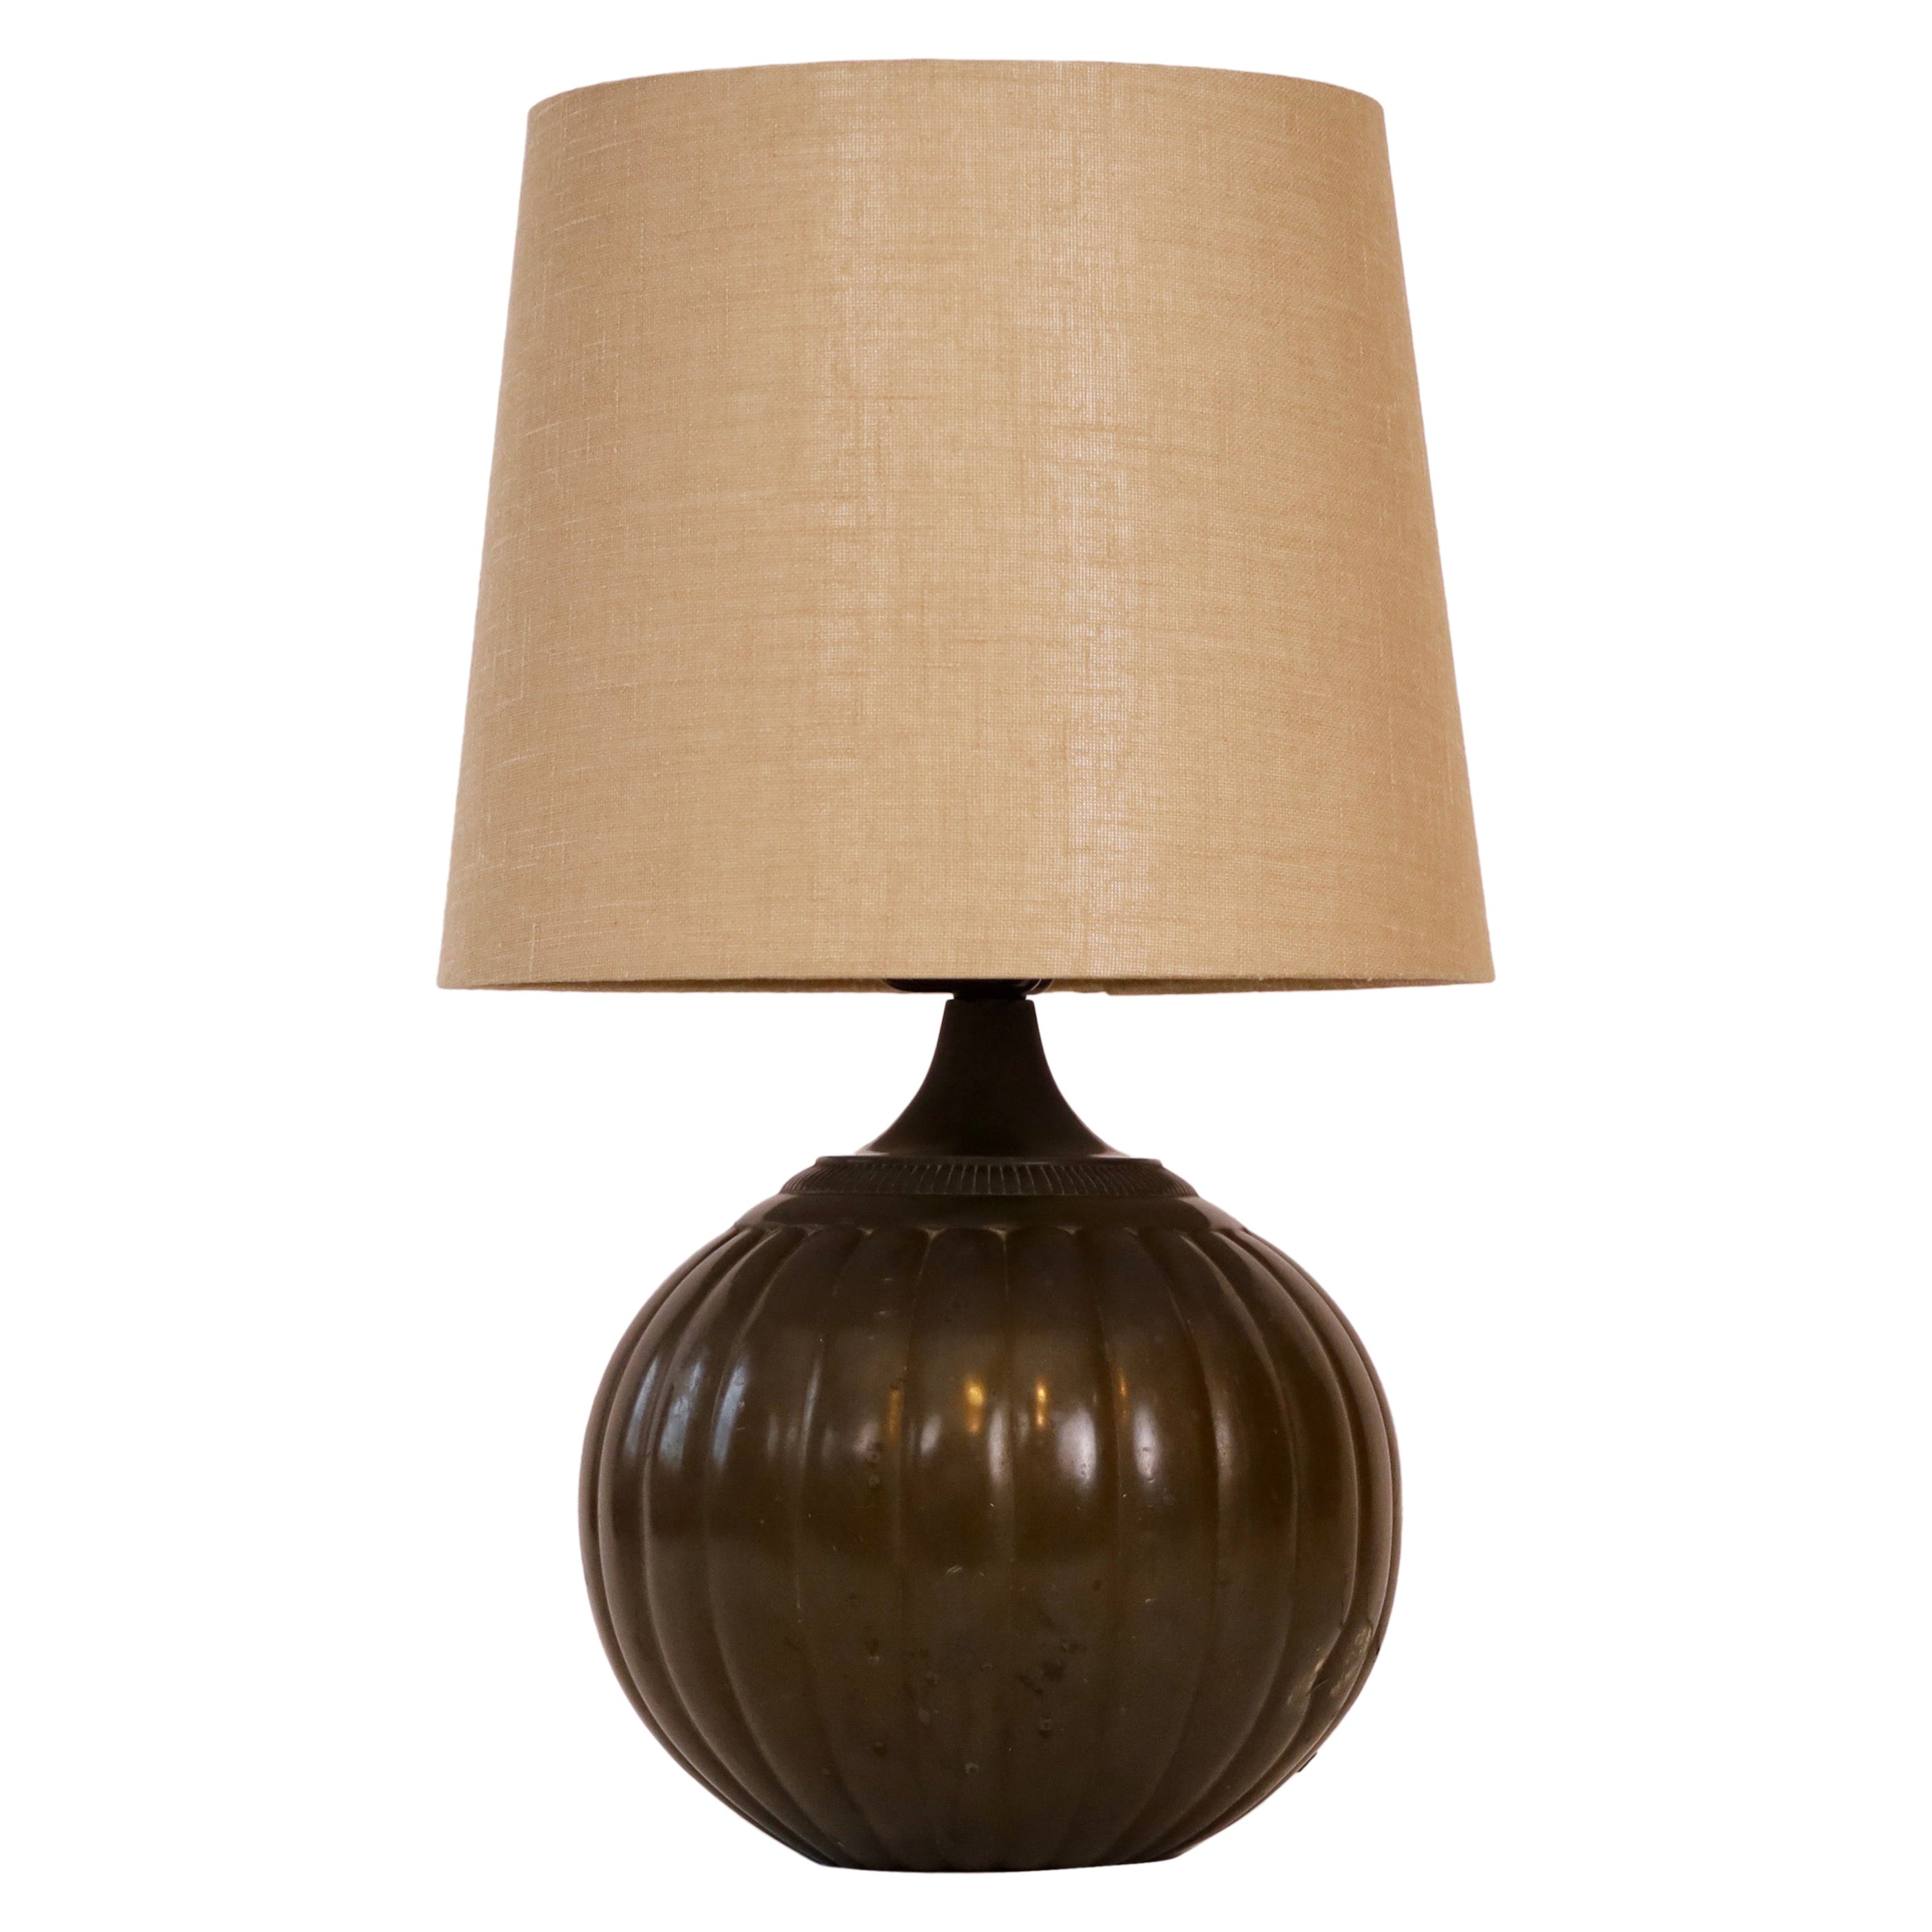 Round table lamp by Just Andersen, 1930s, Denmark